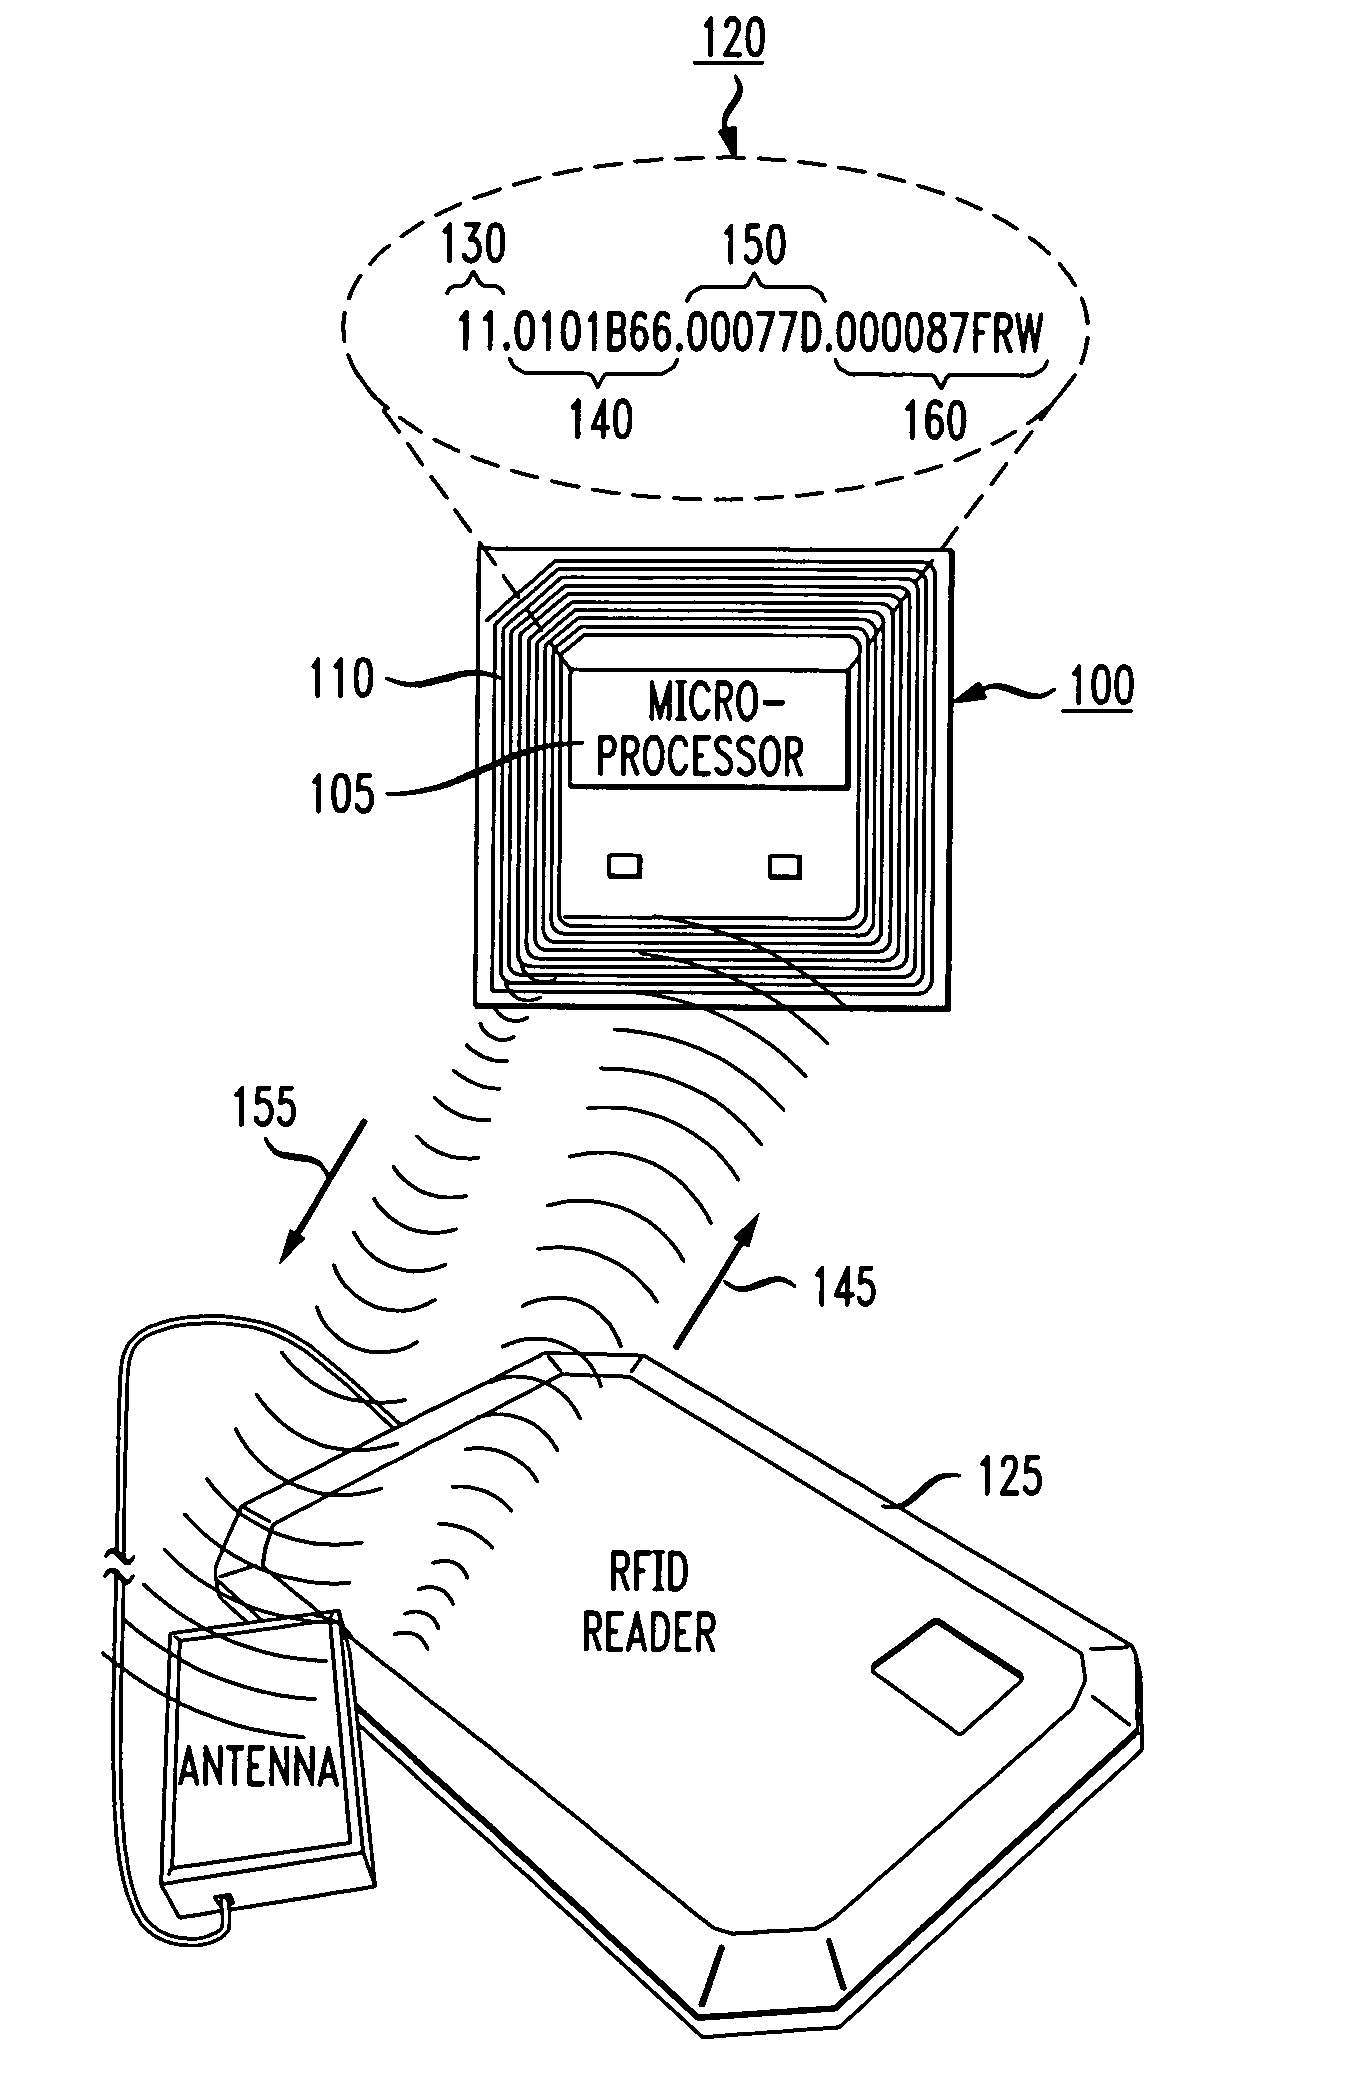 Methods and systems for automatic device provisioning in an RFID network using IP multicast